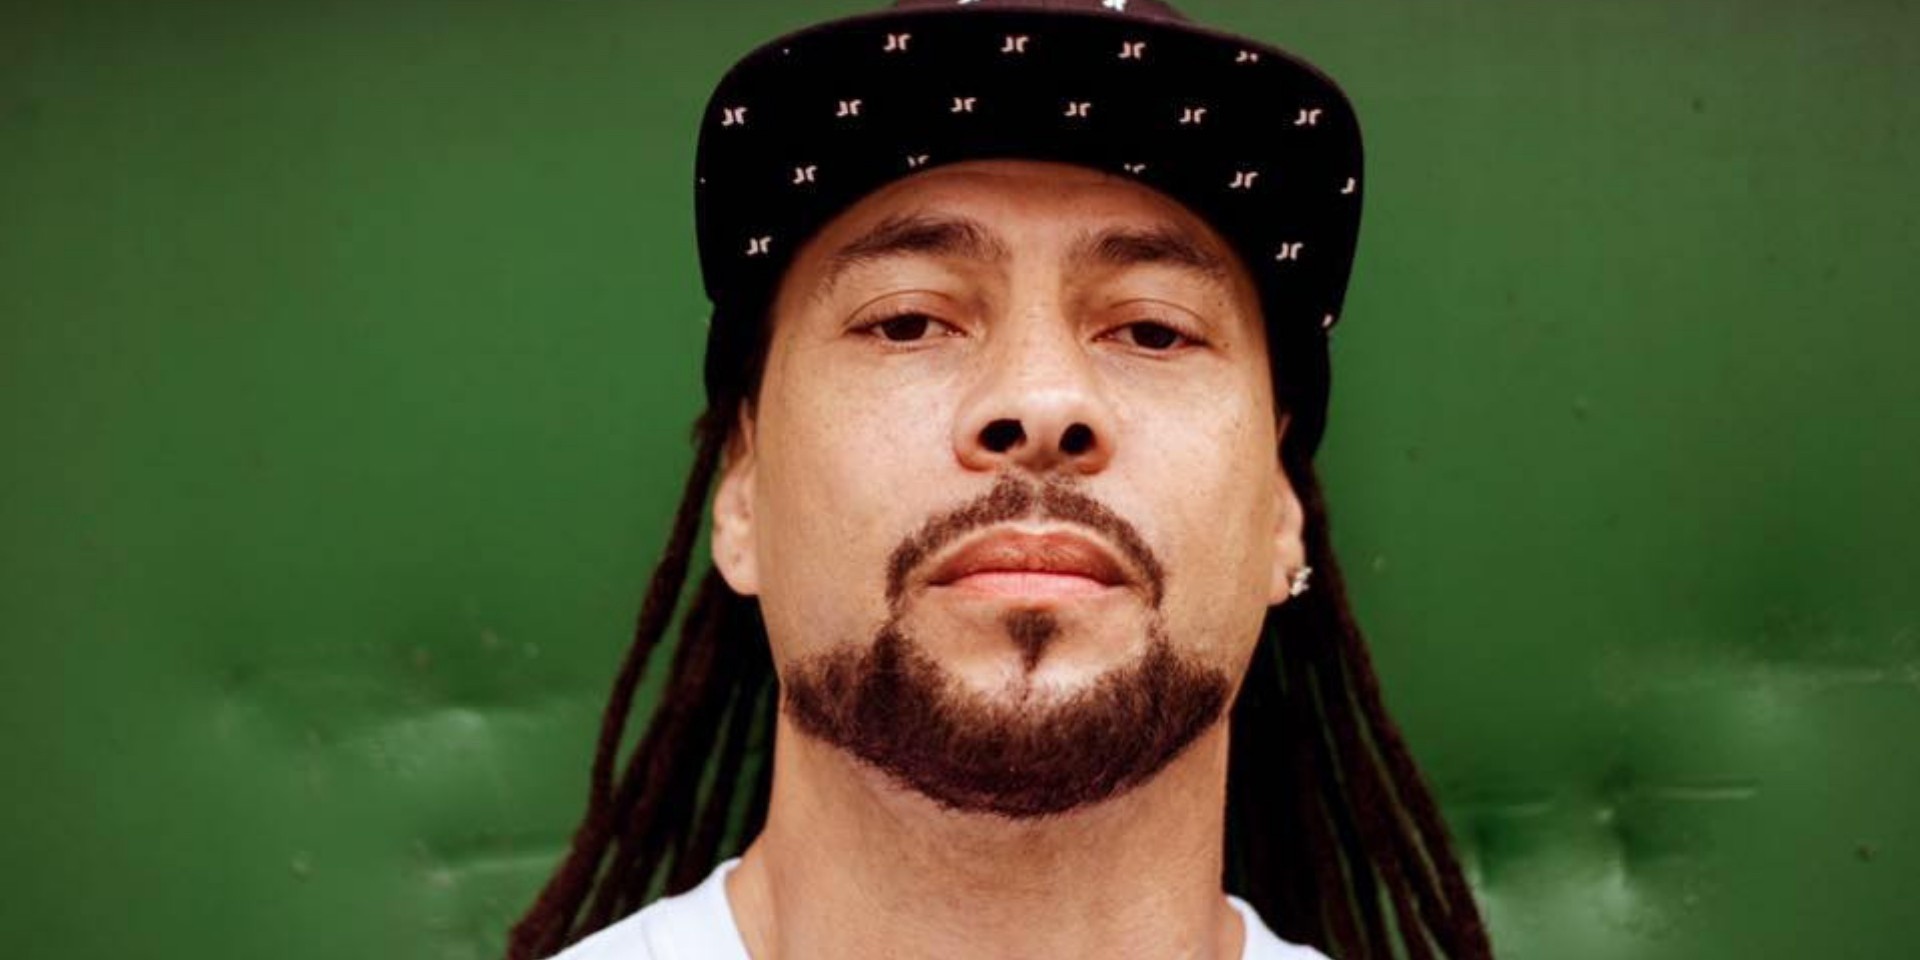 Collective Minds brings UK drum and bass legend Roni Size to Singapore next month